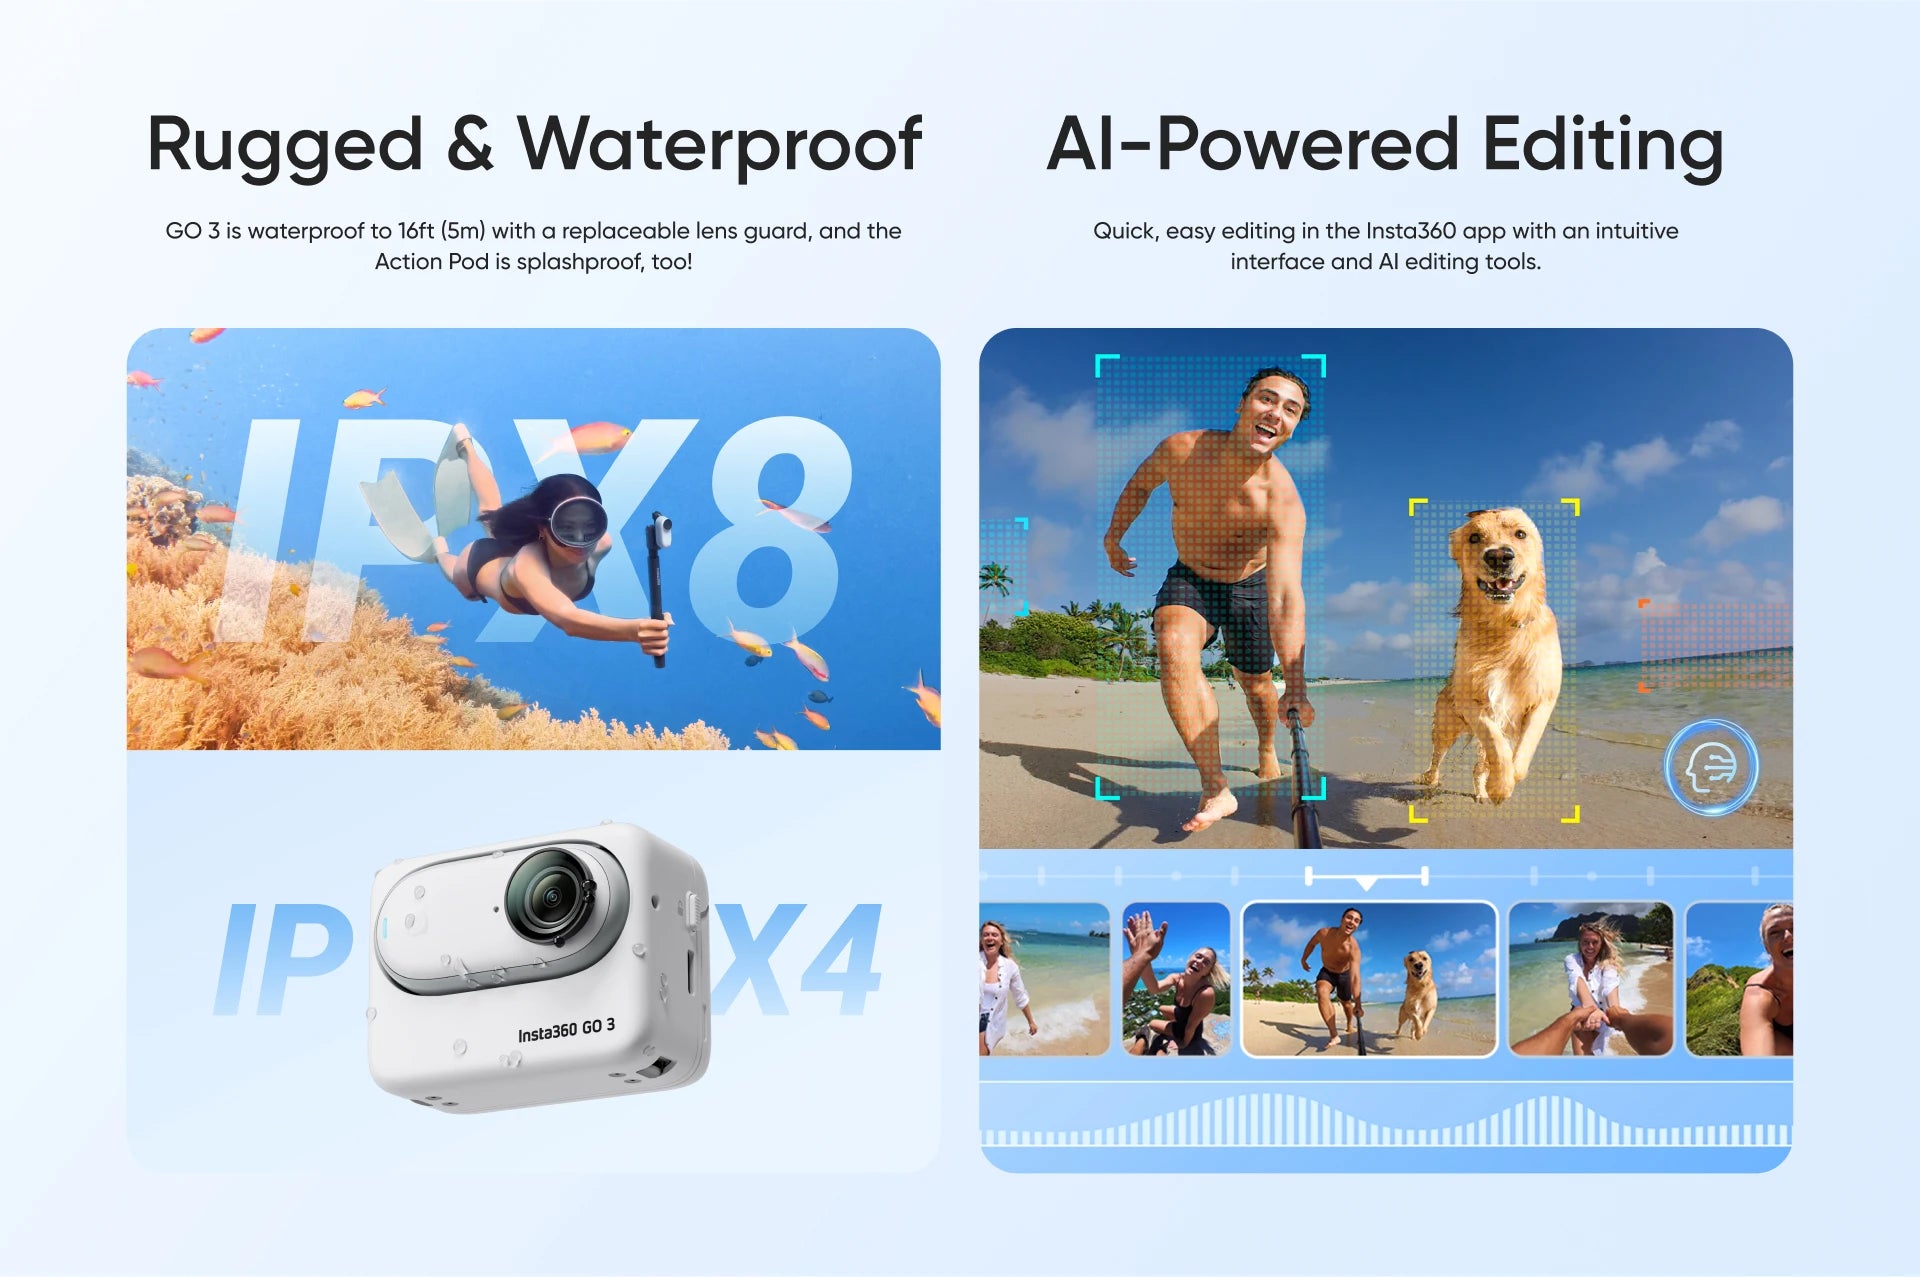 Insta360 GO 3 operation camera, Al-Powered Editing GO 3 is waterproof to I6ft (Sm)